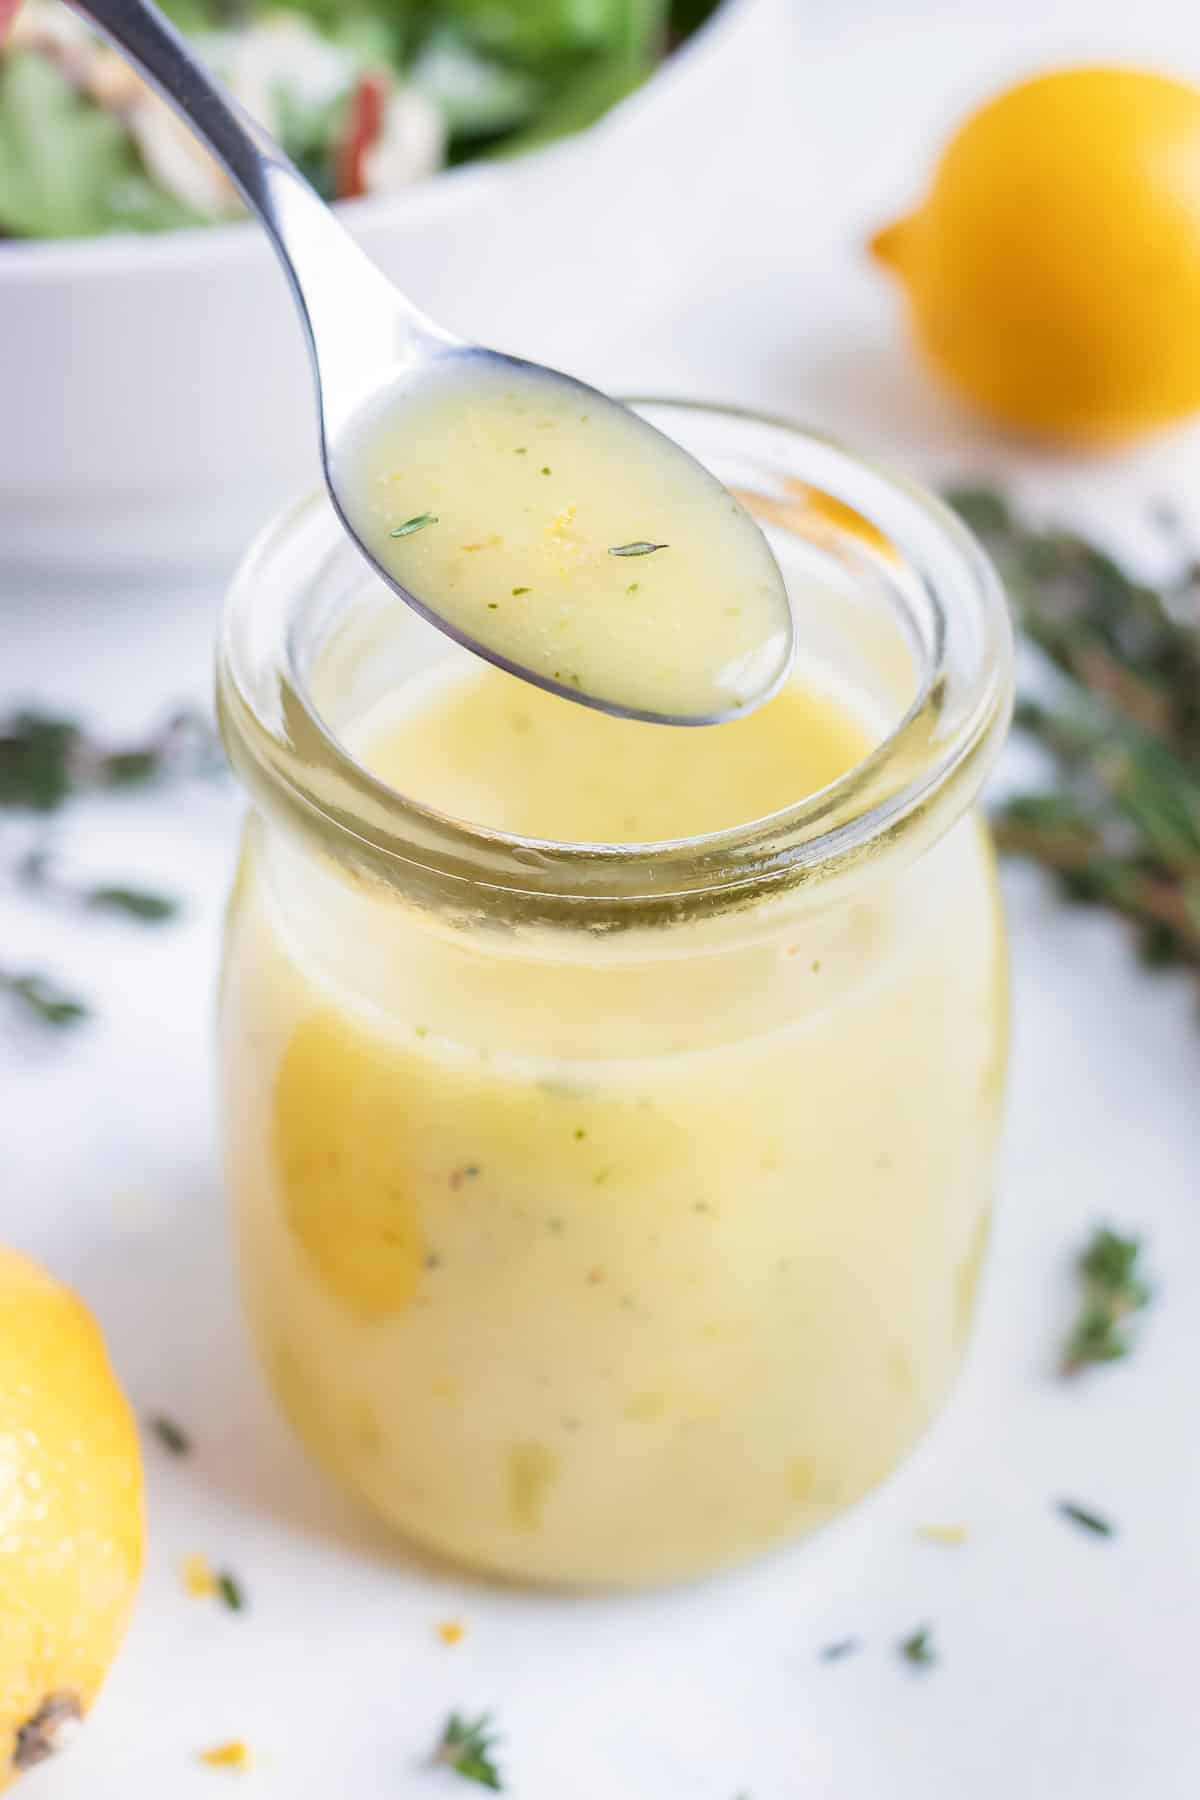 Easy homemade vinaigrette is served with a metal spoon.